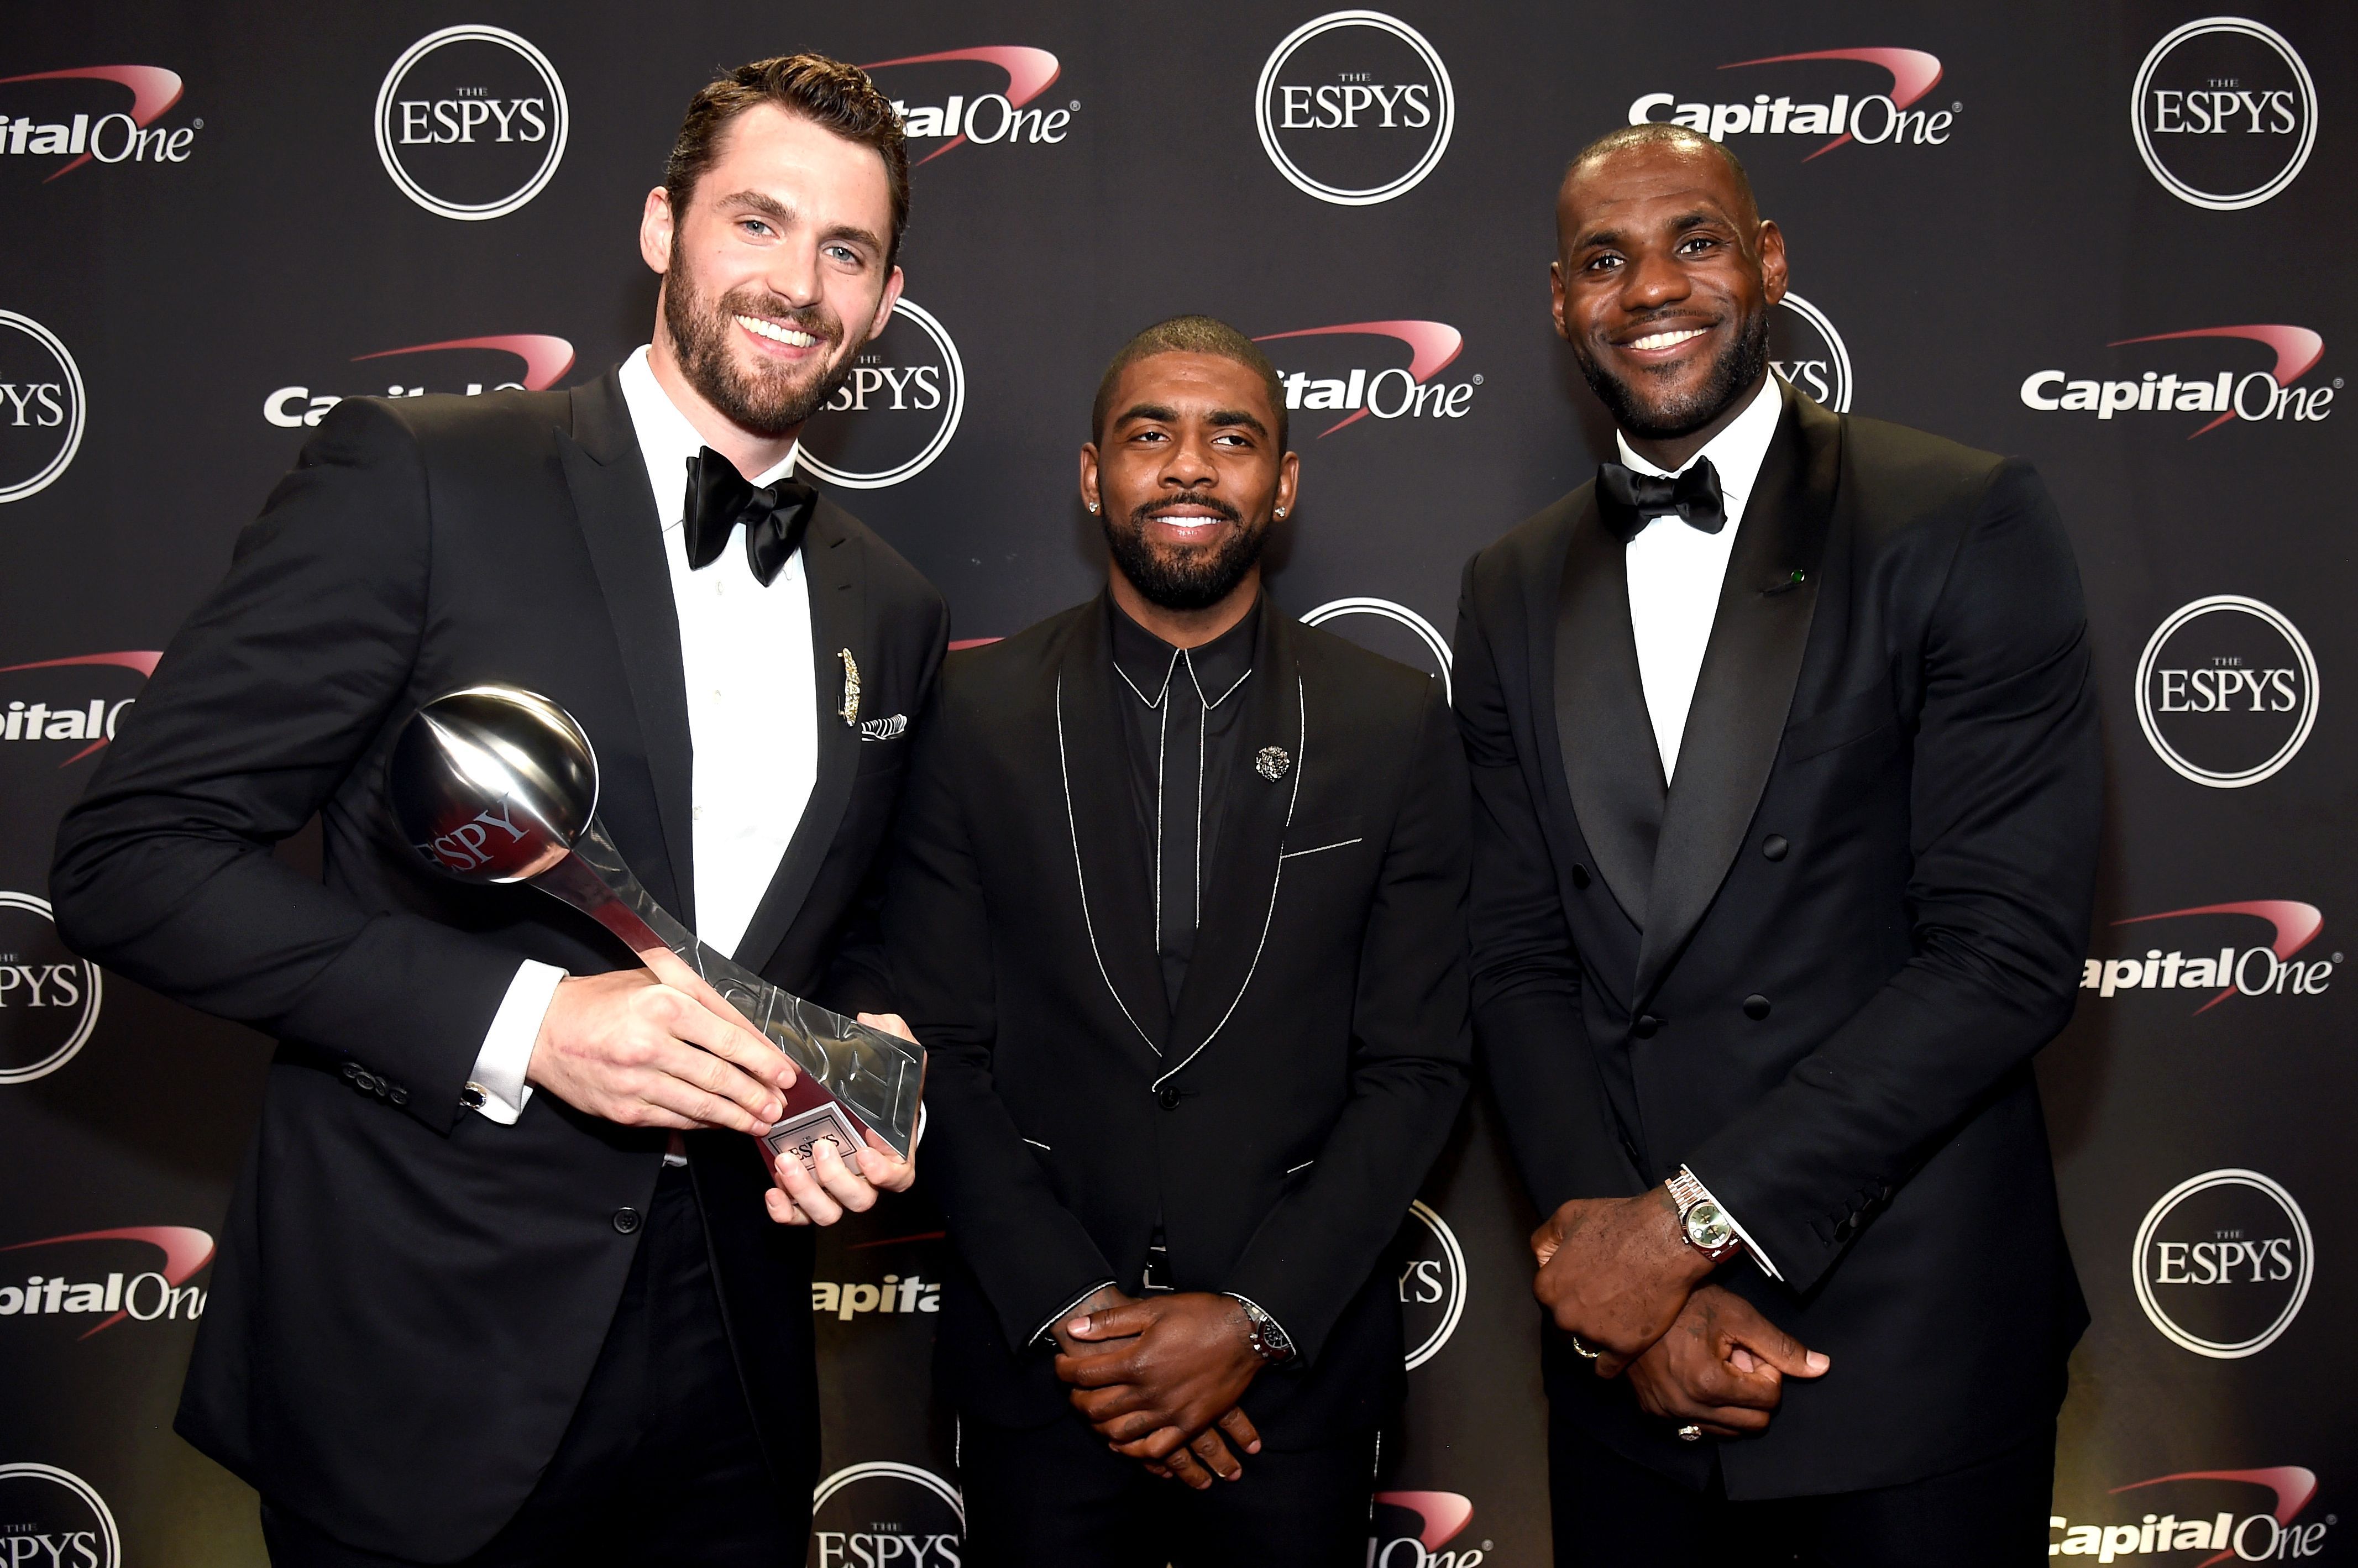 Kevin Love, Kyrie Irving and LeBron James